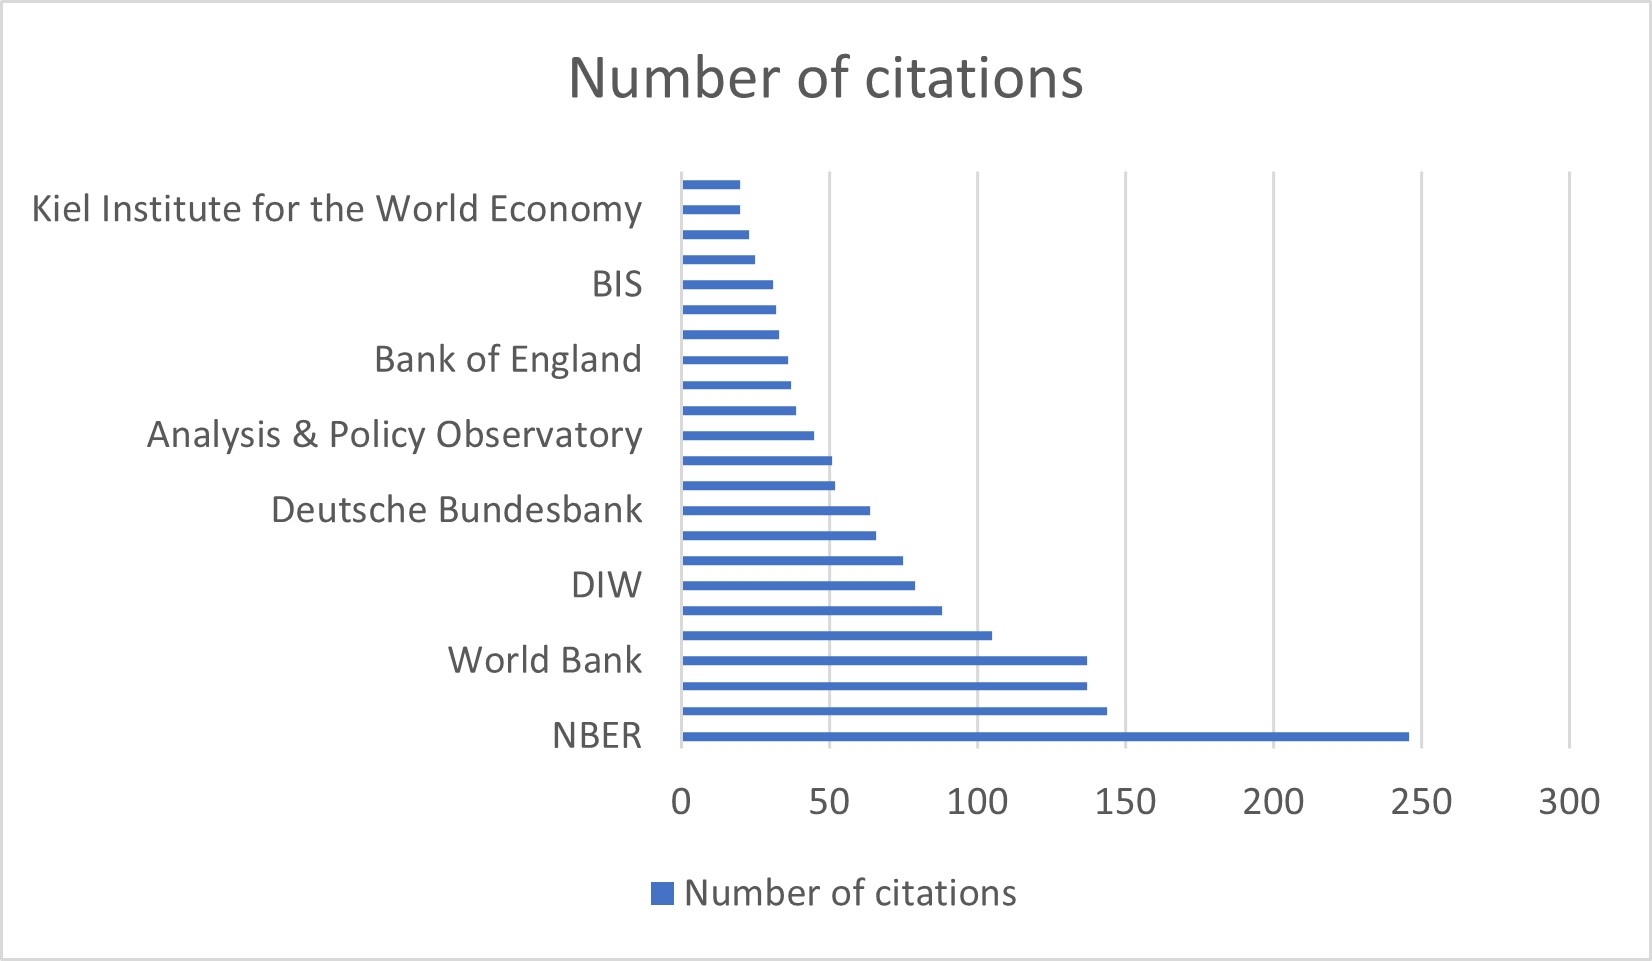 Chart of institutions listed based on number of citations